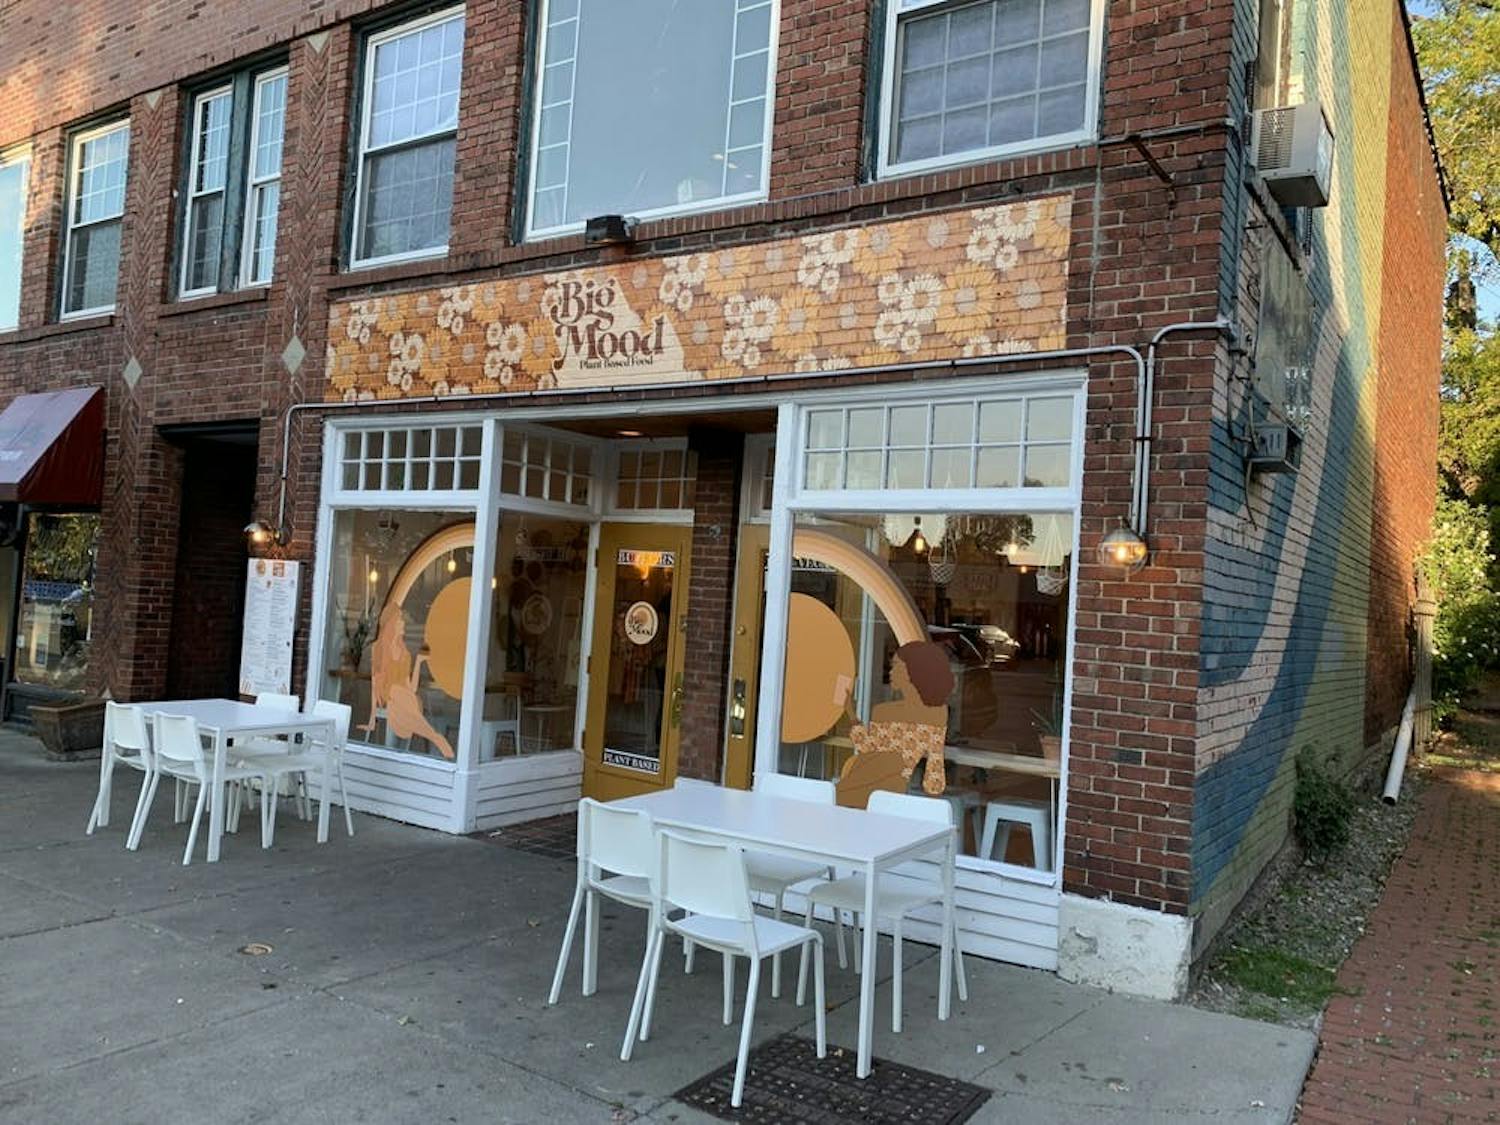 Big Mood, a popular vegan eatery in Elmwood Village, is permanently closed, according to sources.